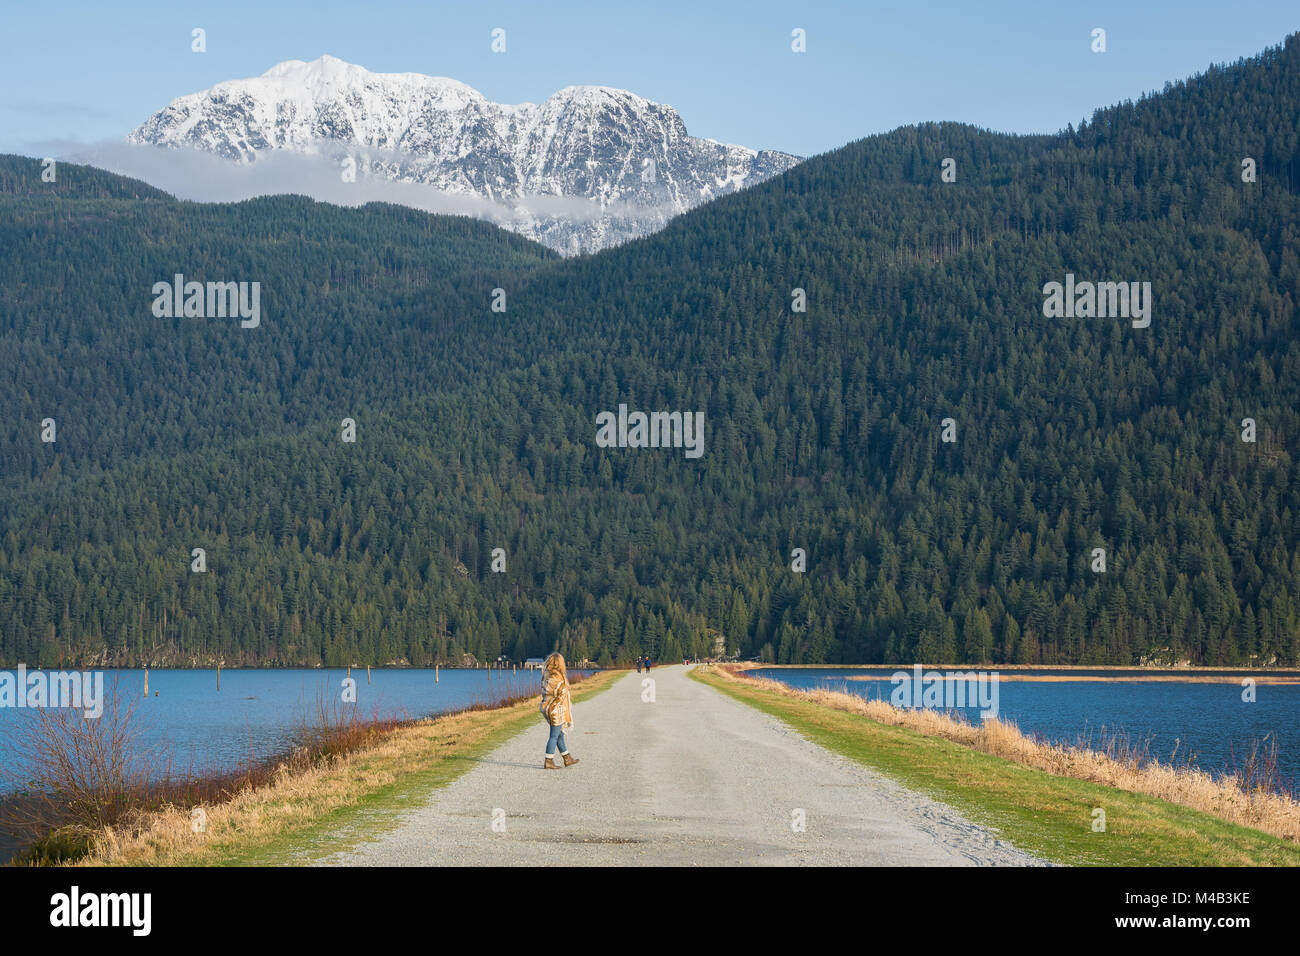 A girl on a walking trail surrounded by snow capped mountains Stock Photo